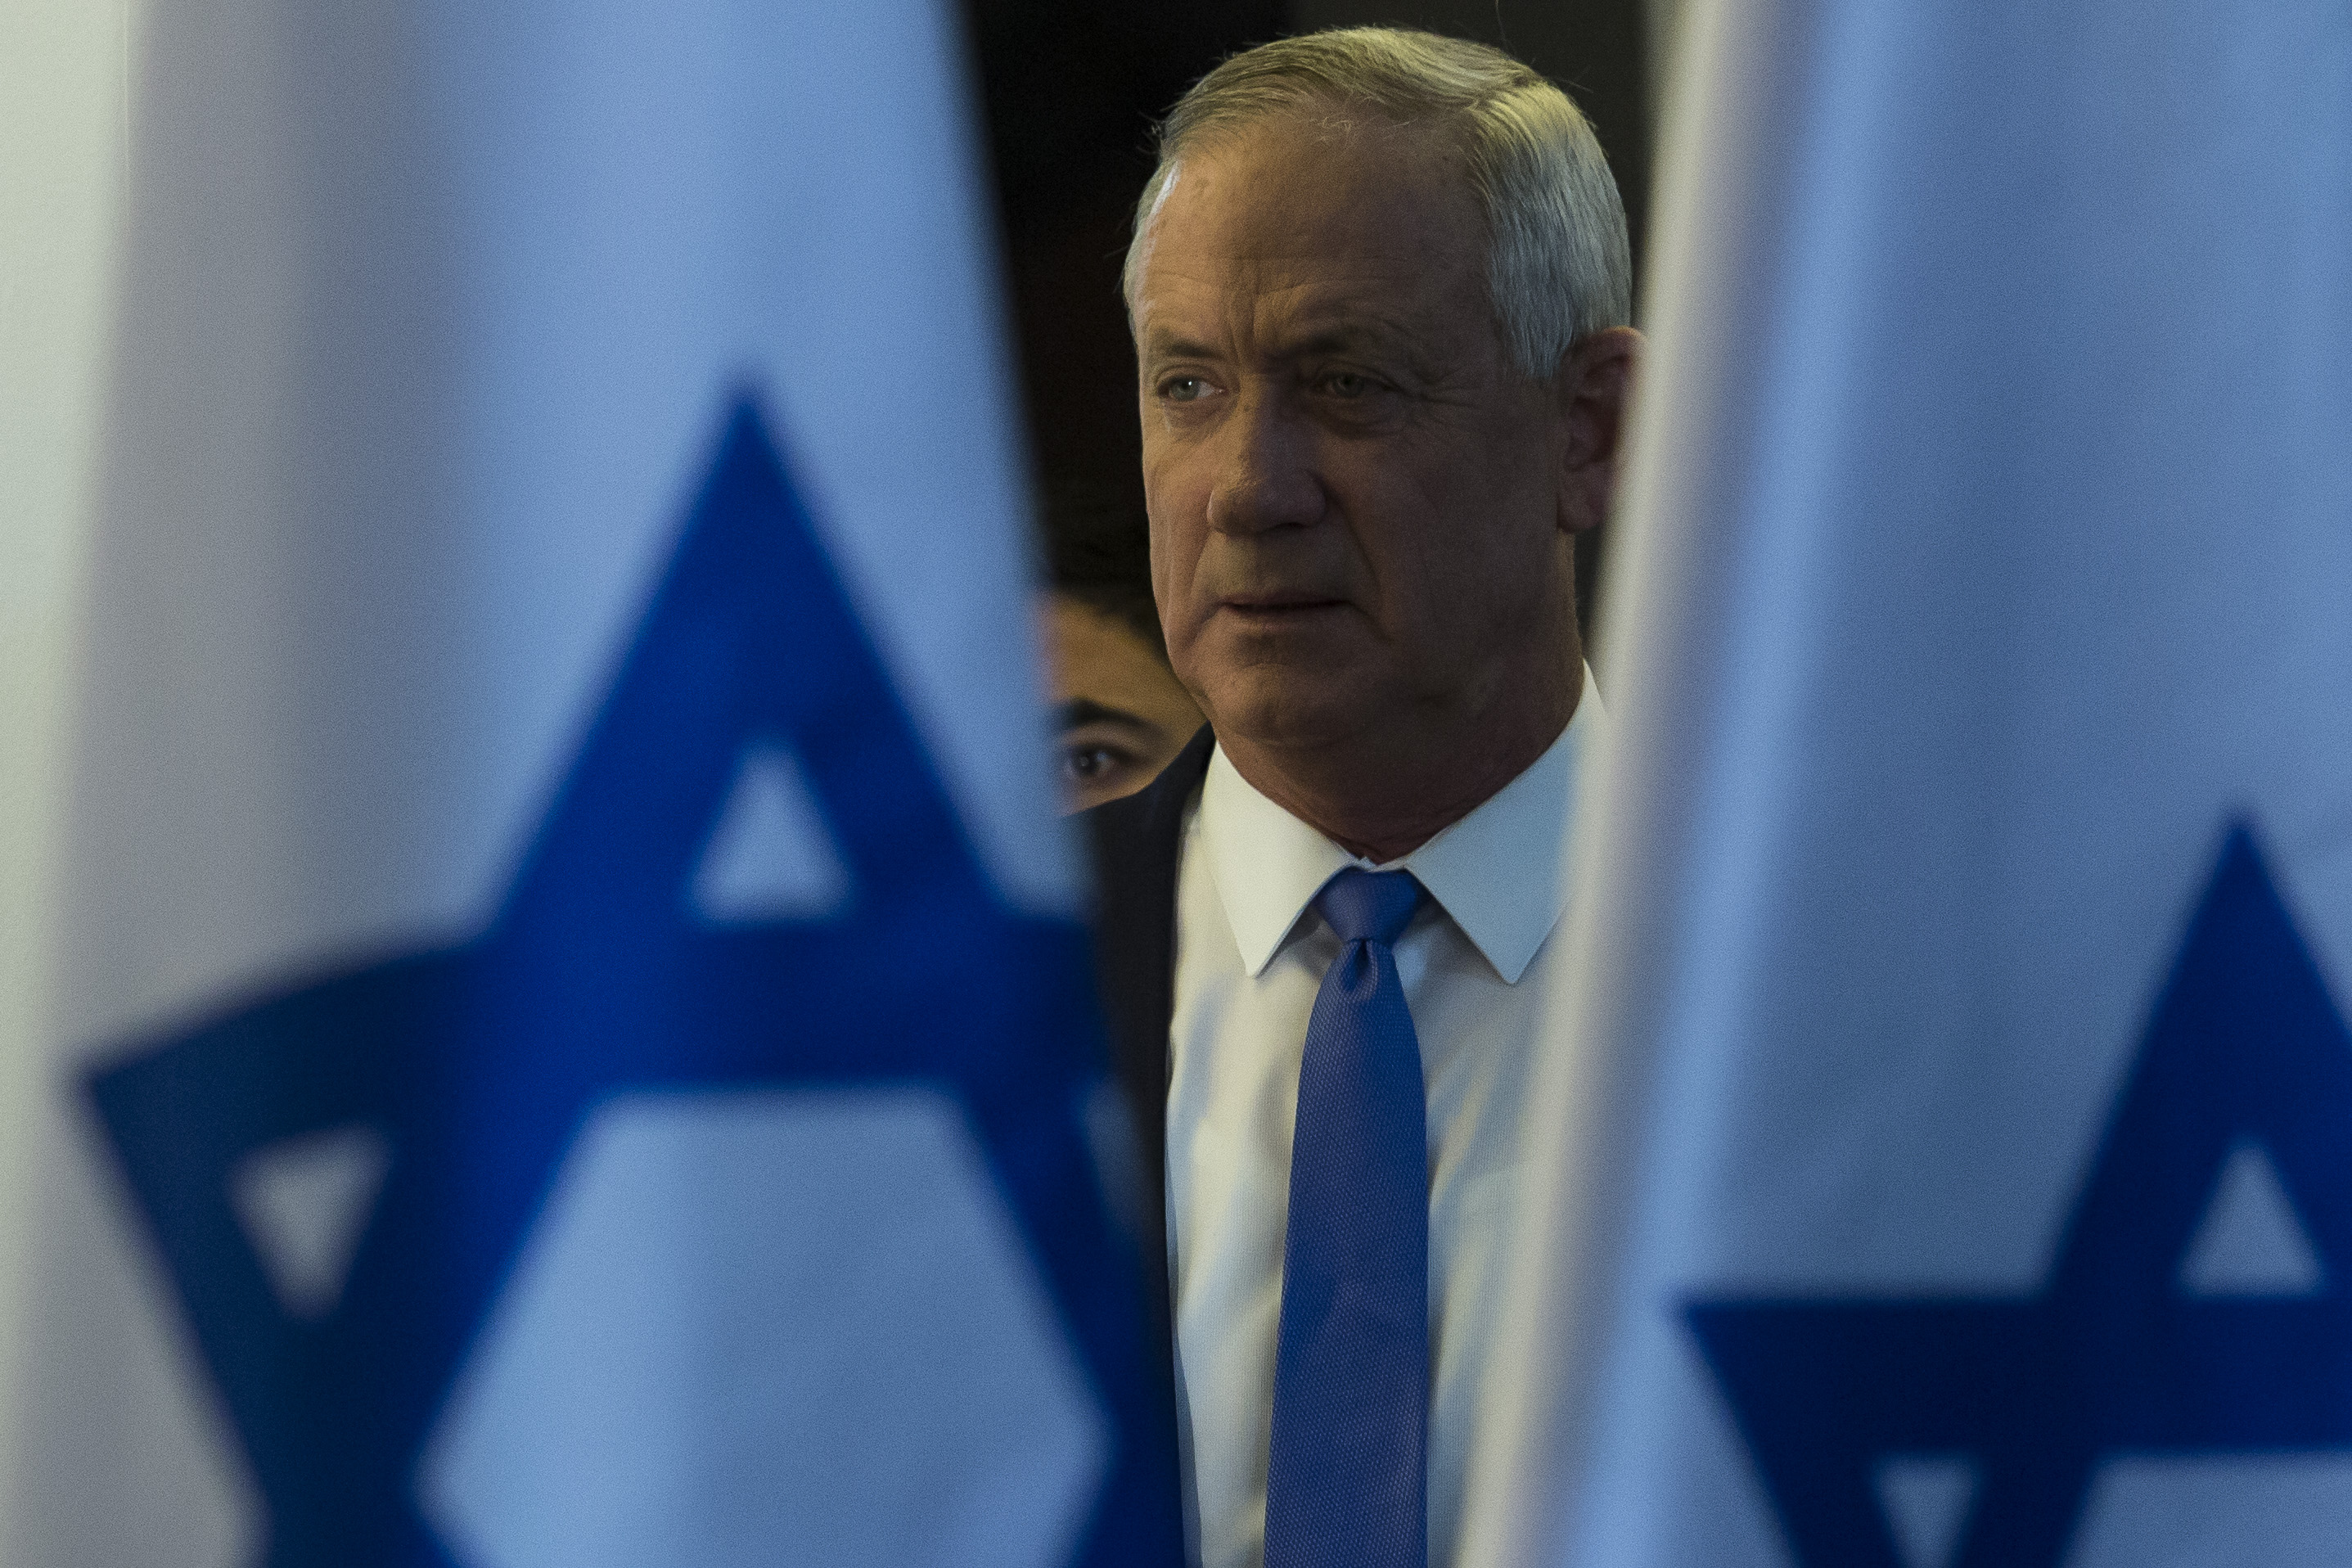 Benny Gantz, Blue and White party leader attends a press conference after failing to form a goverment on November 20, 2019 in Tel Aviv, Israel. (Amir Levy—Getty Images)